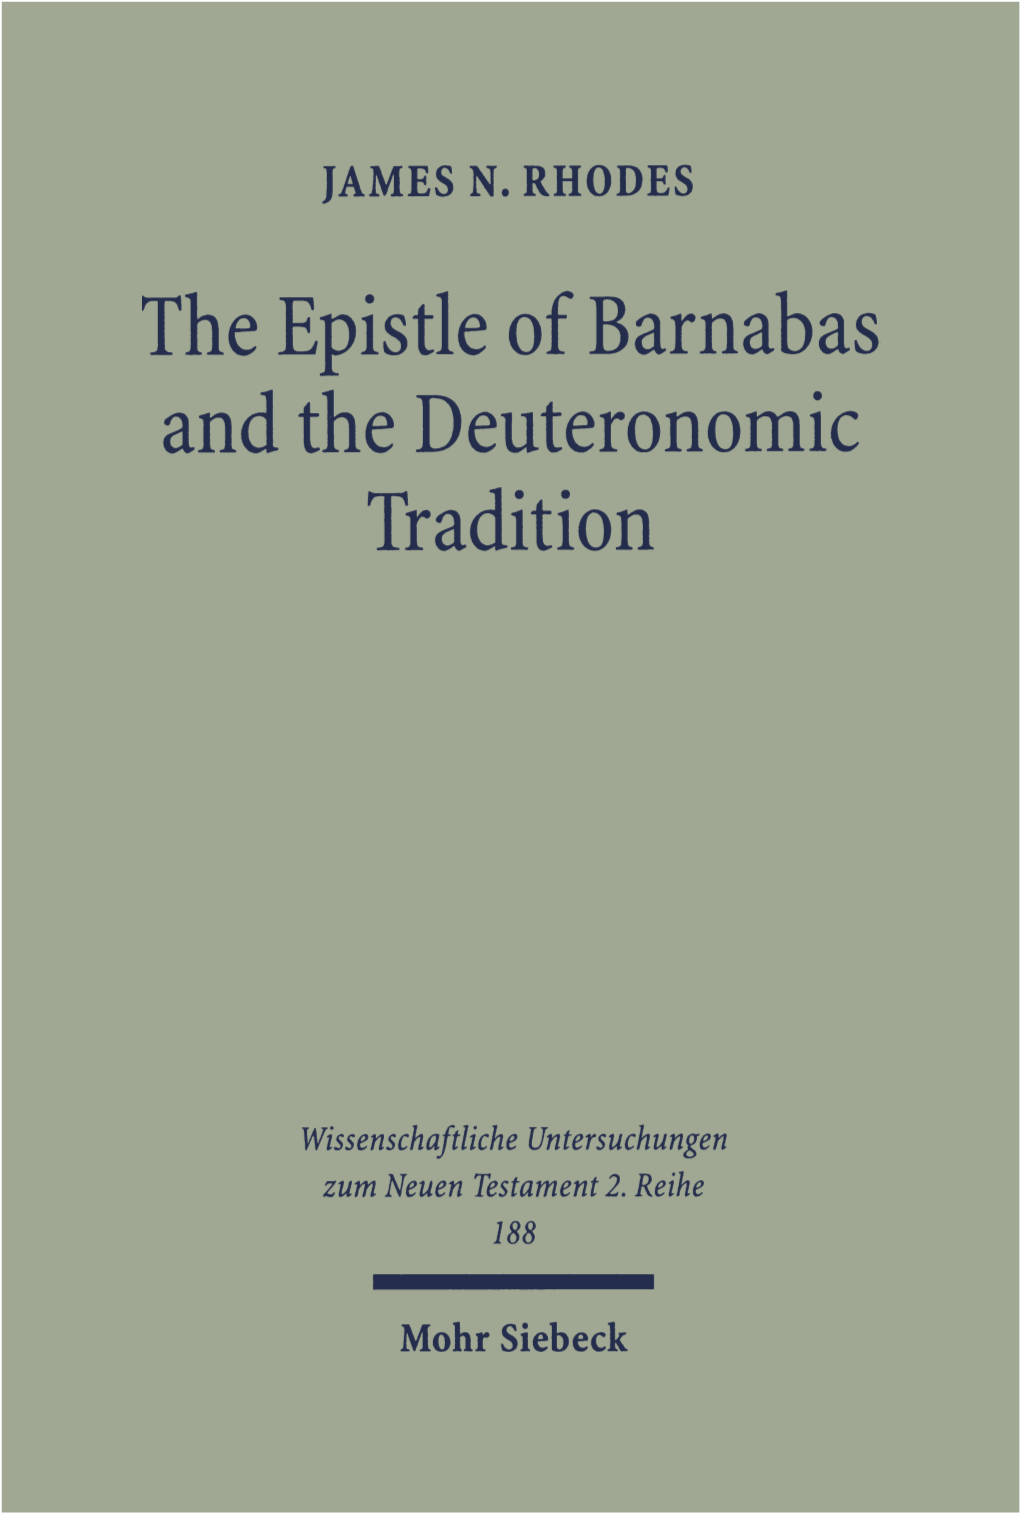 The Epistle of Barnabas and the Deuteronomic Tradition. Polemics, Paraenesis, and the Legacy of the Golden-Calf Incident